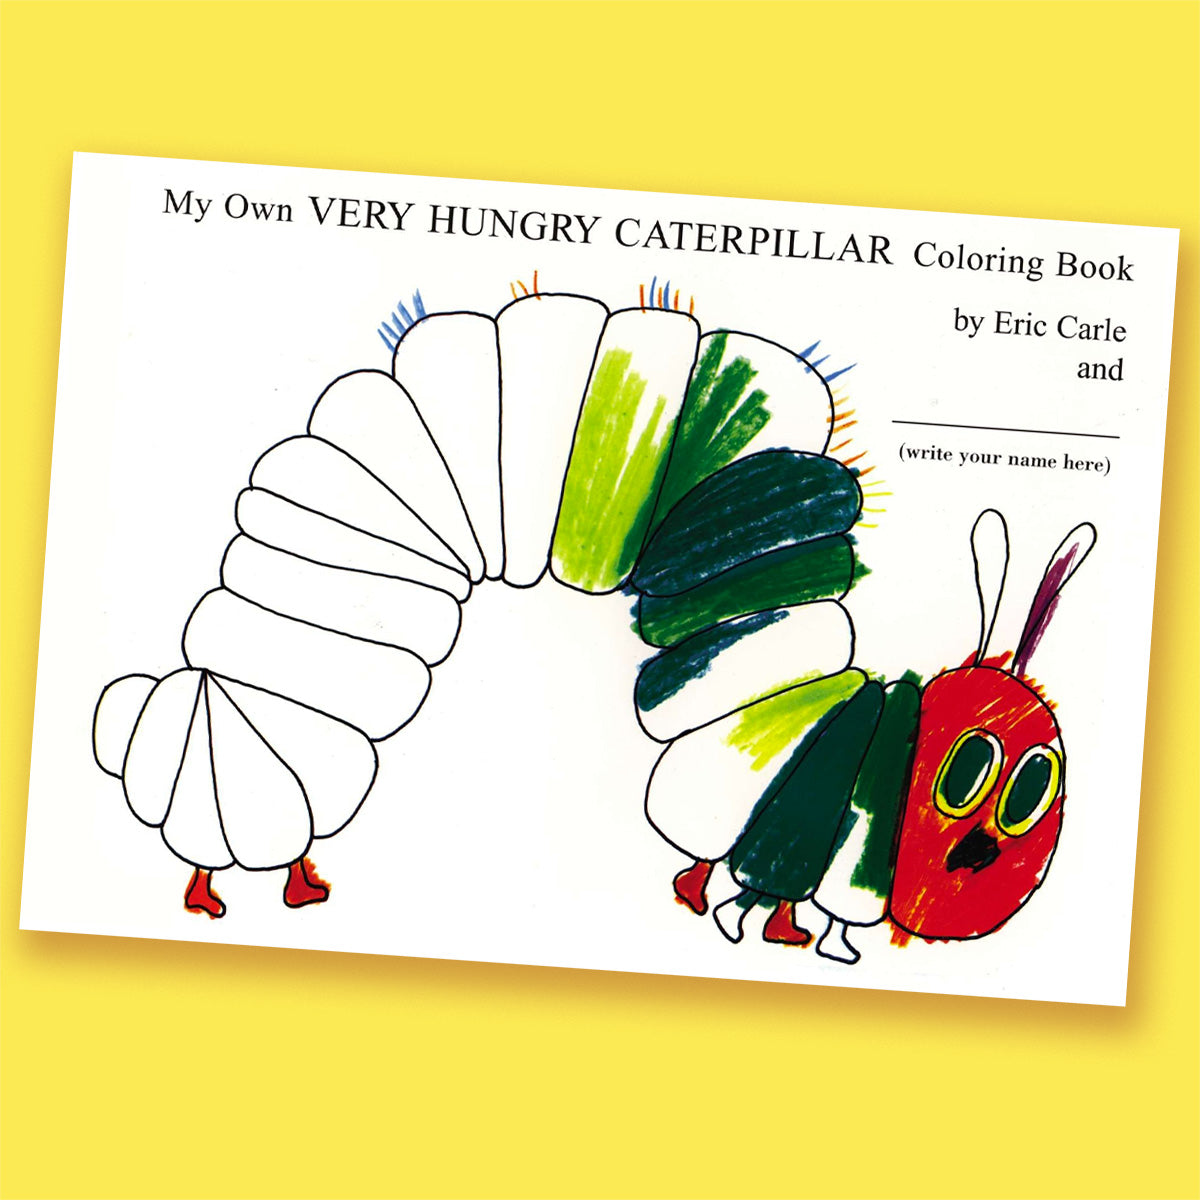 My Own The Very Hungry Caterpillar Coloring Book By Eric Carle